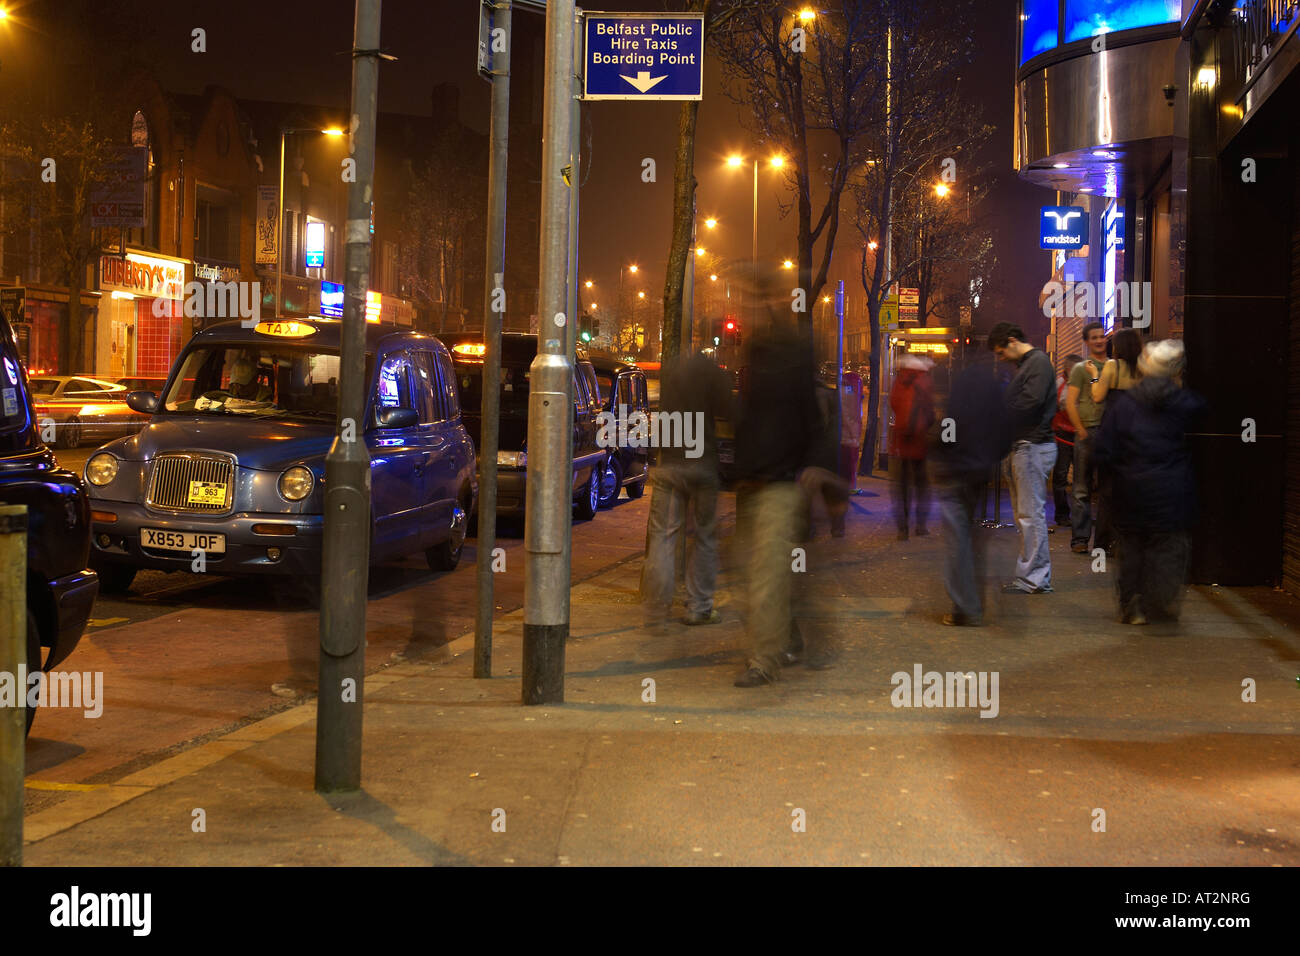 people nightclubbers walking past pubs and clubs on bradbury place belfast at taxi rank Stock Photo